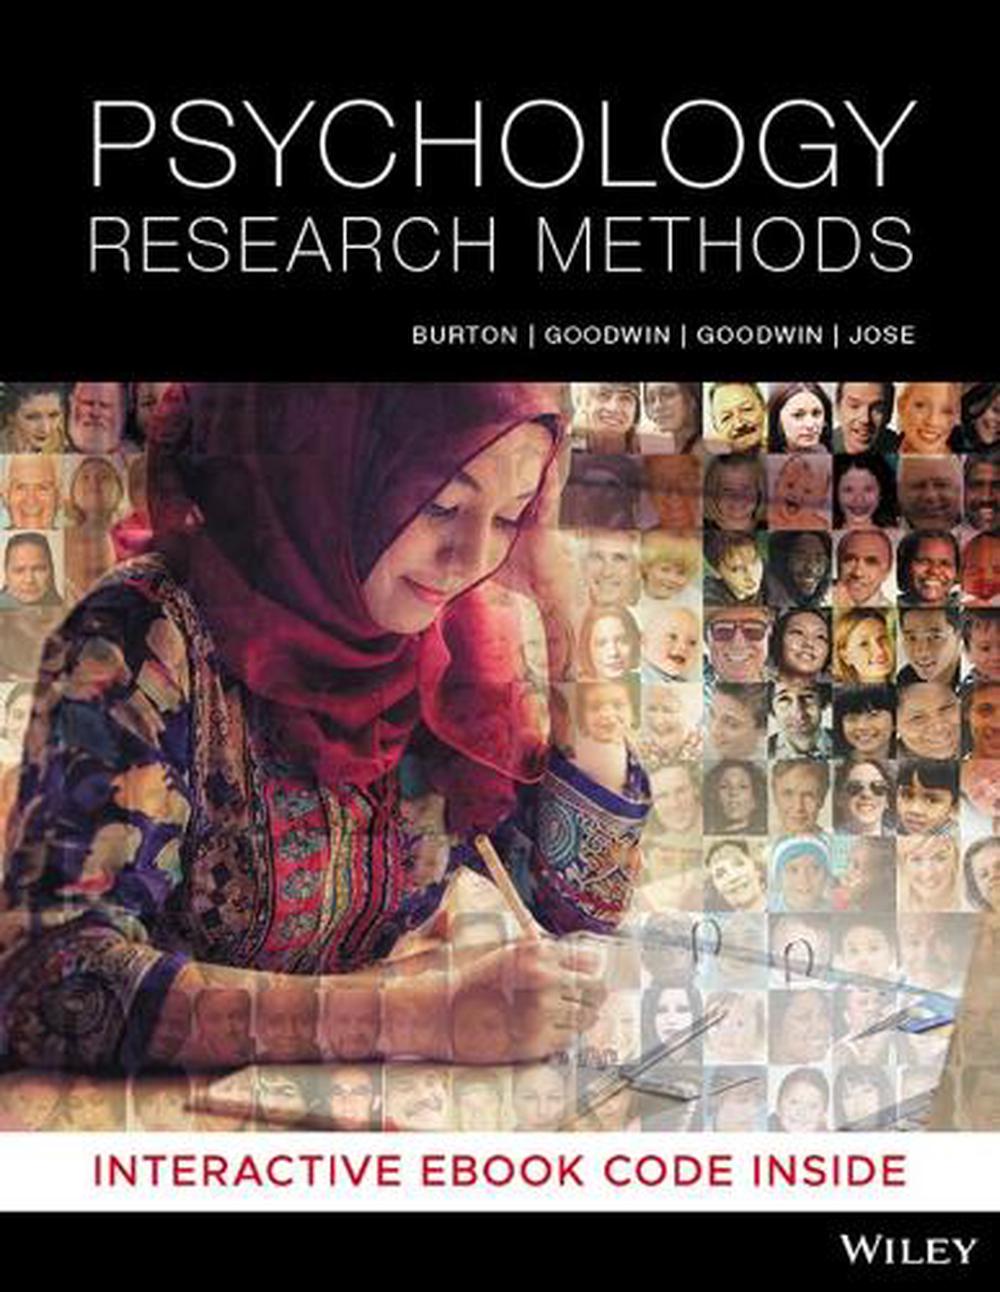 best book for research methods in psychology